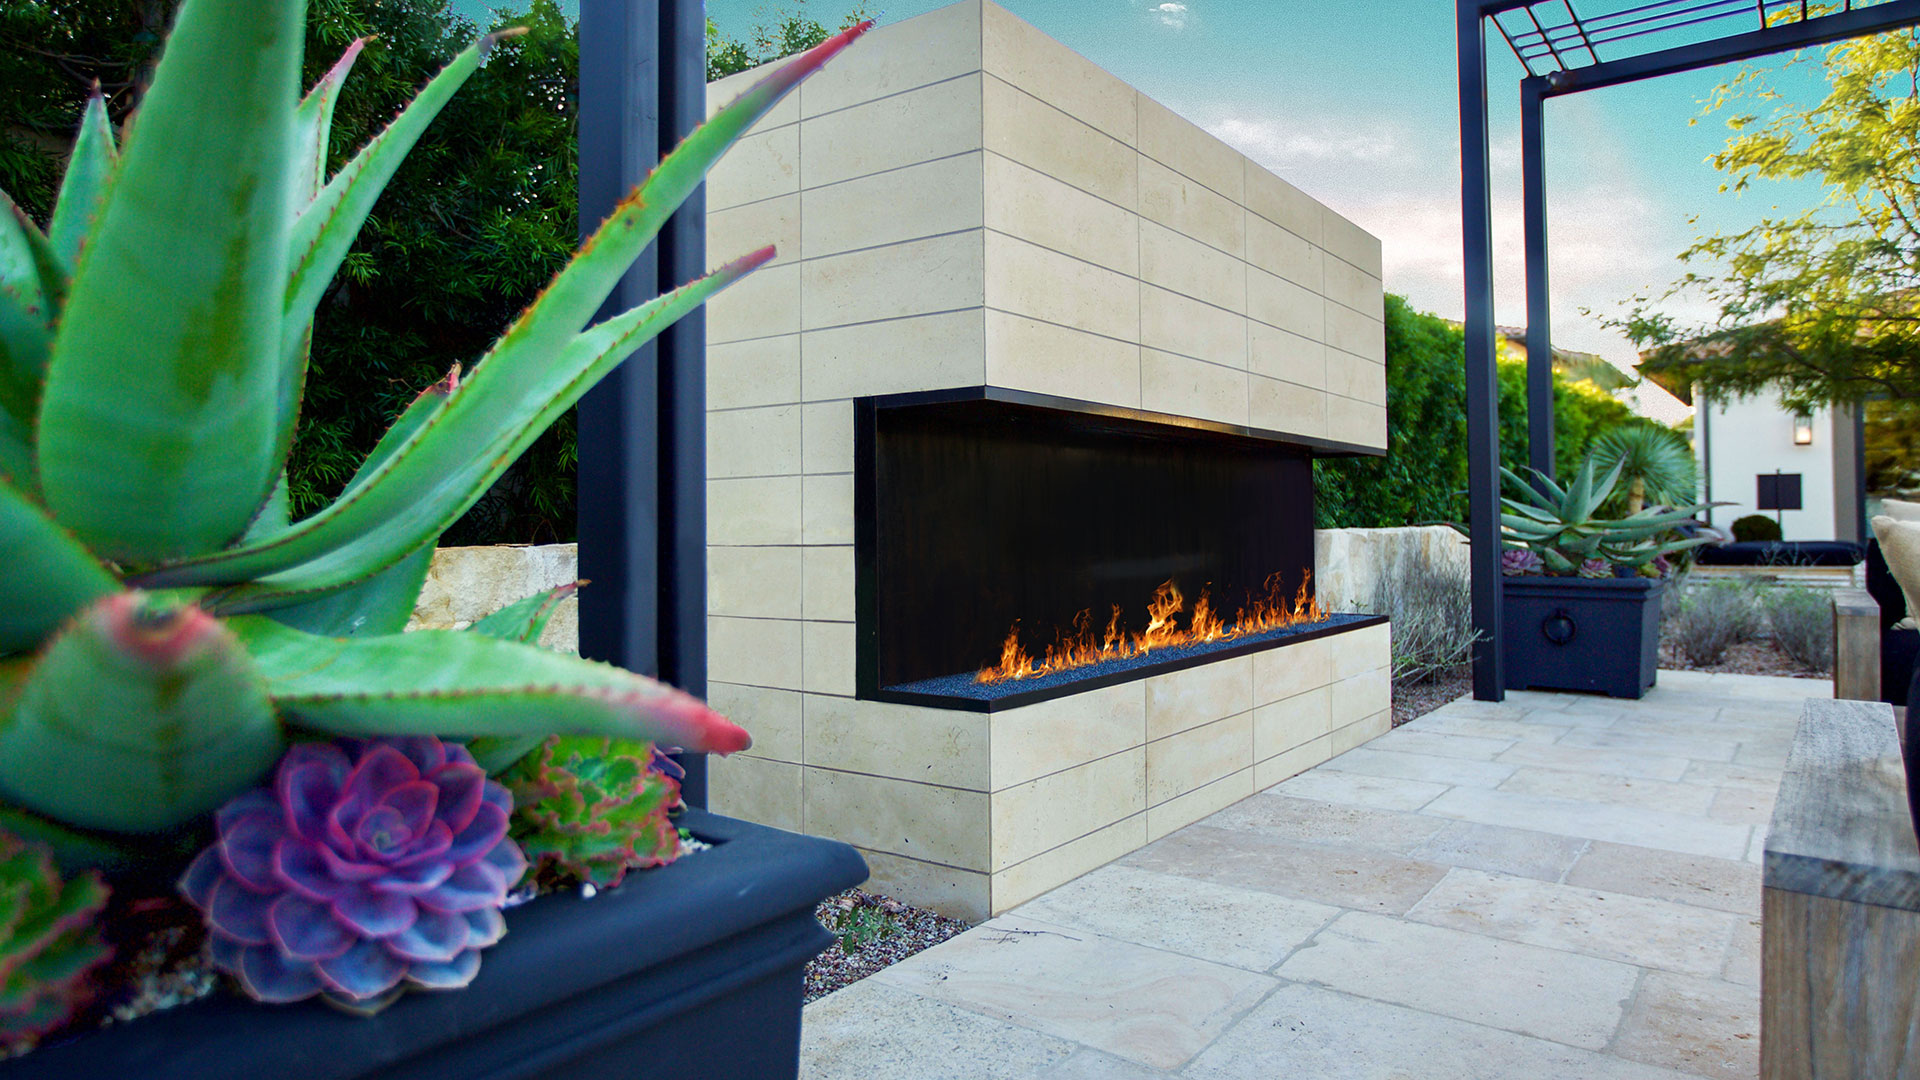 Nadia Neo Planks natural stone thin veneer installed on outdoor gas fireplace